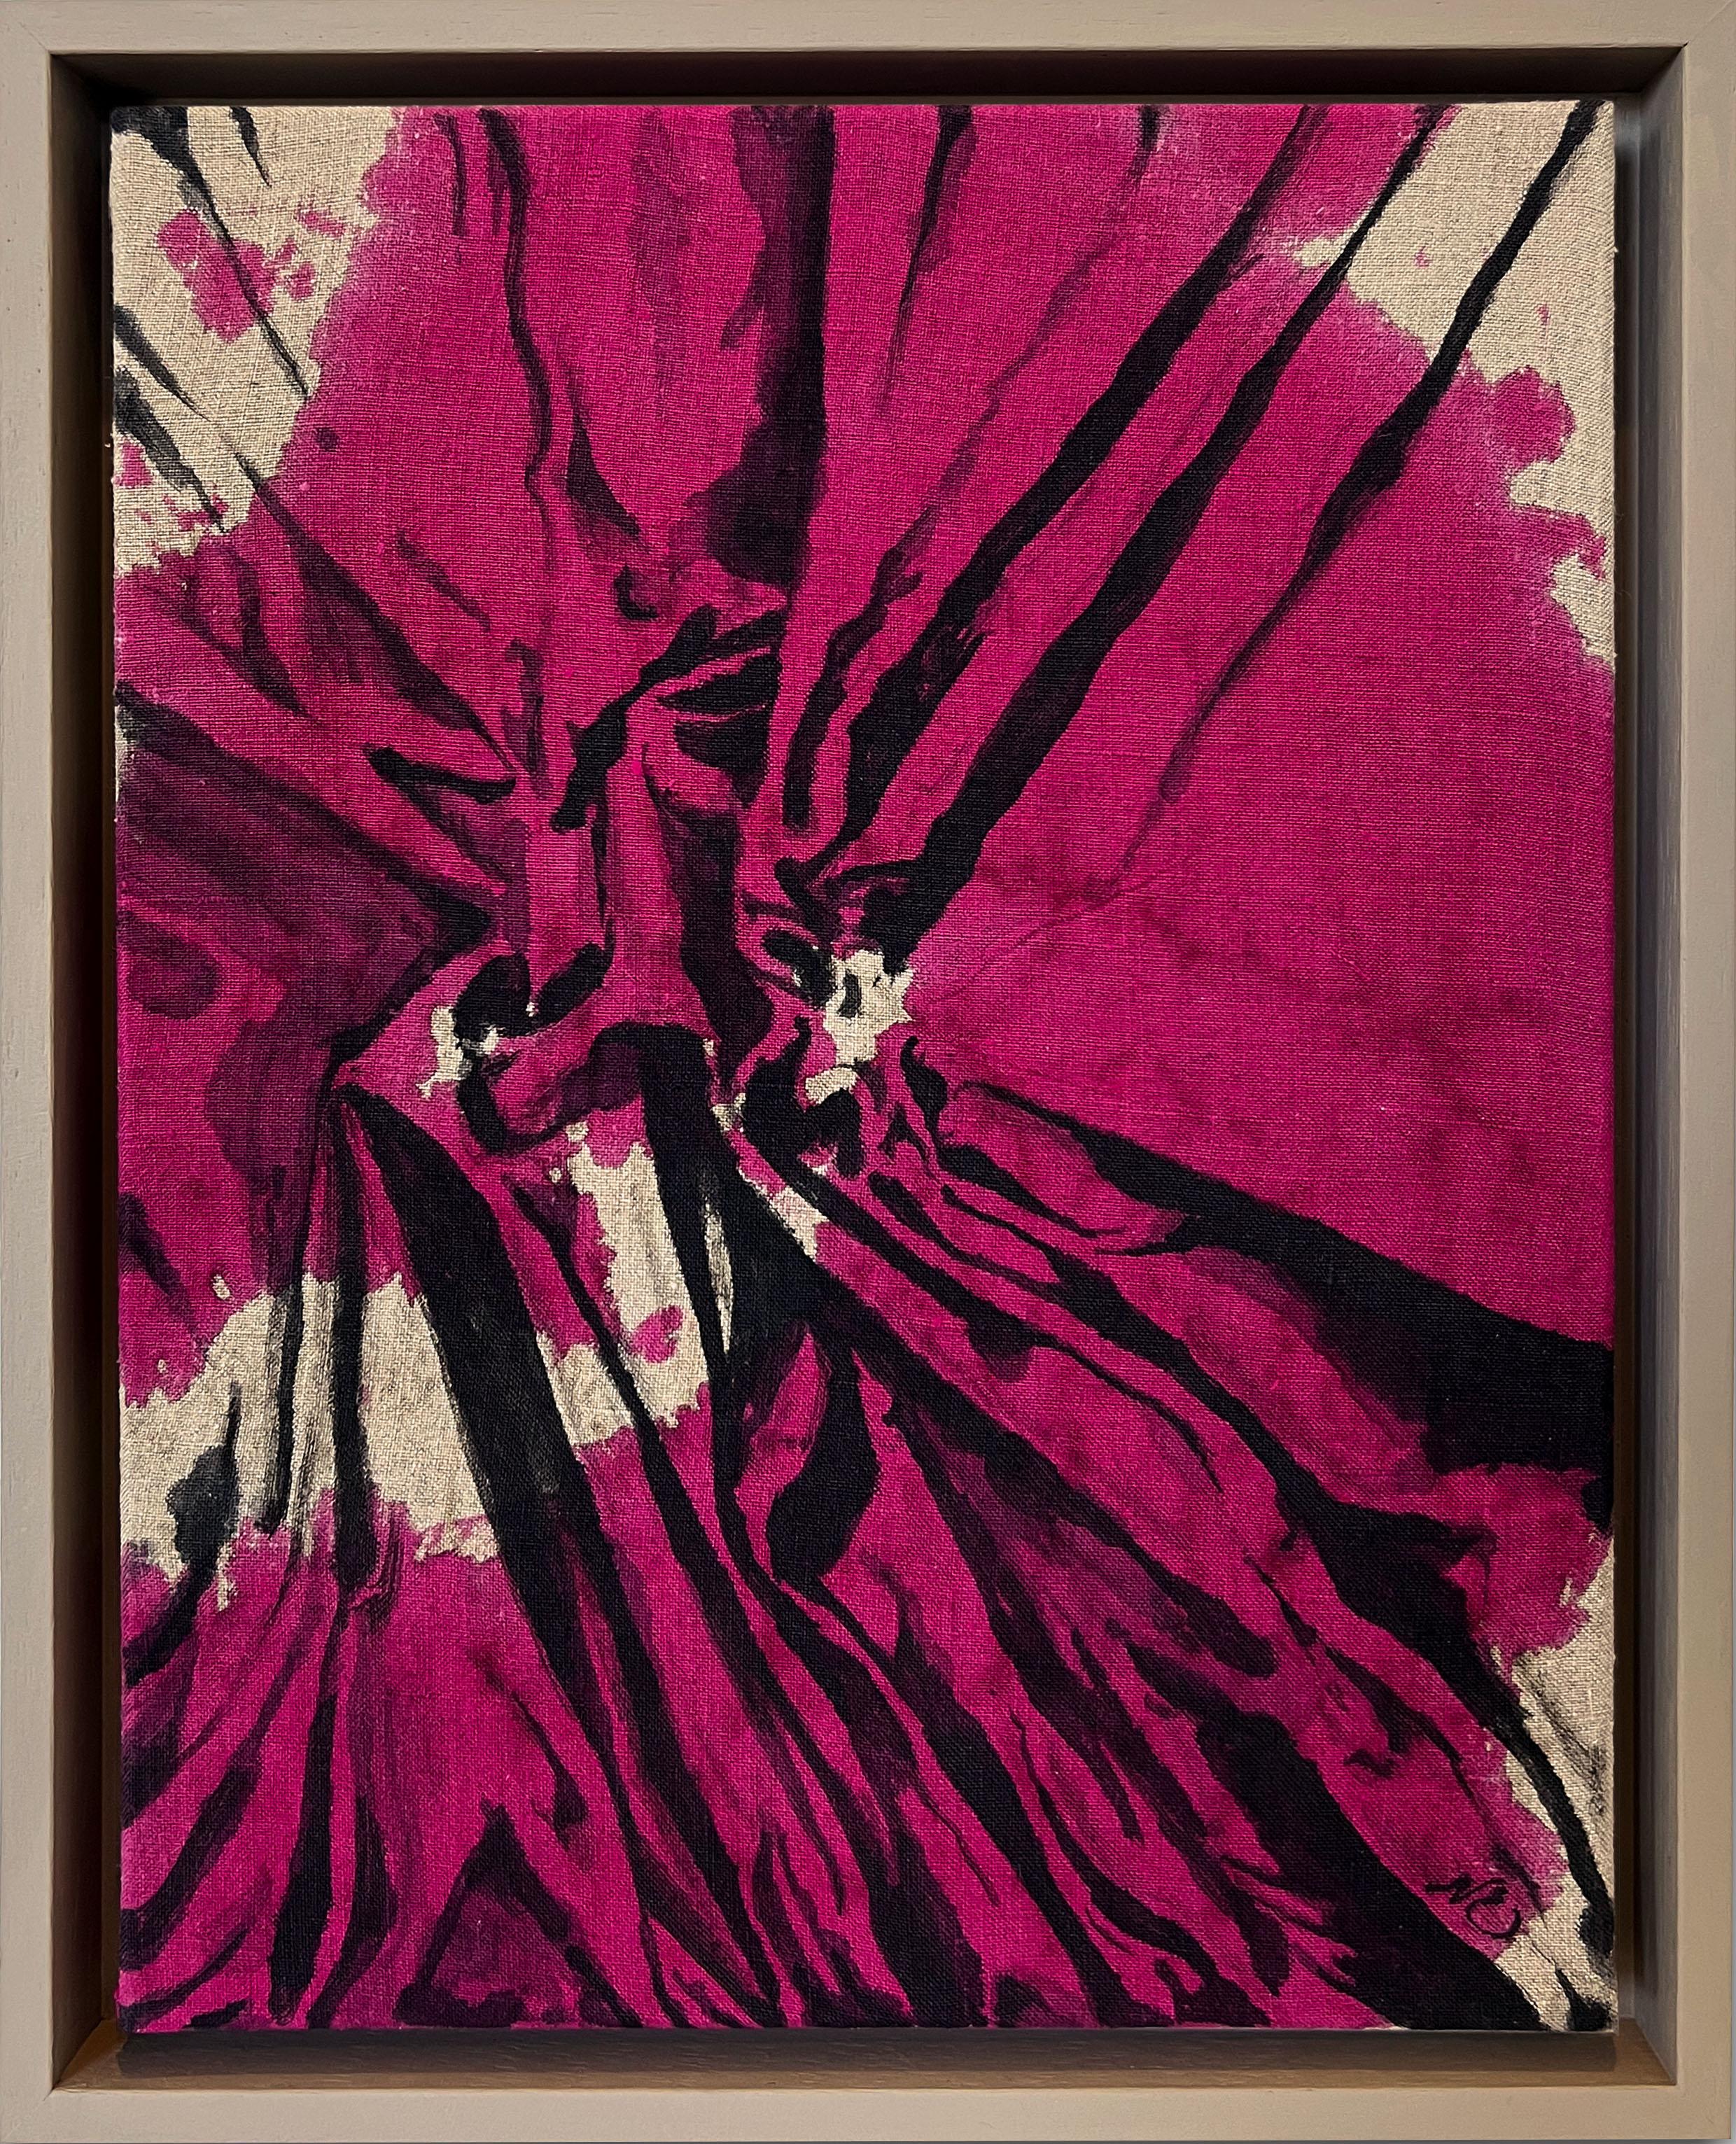 "Shown the Sheets" (abstract, fuchsia, pink, custom framed painting on linen)